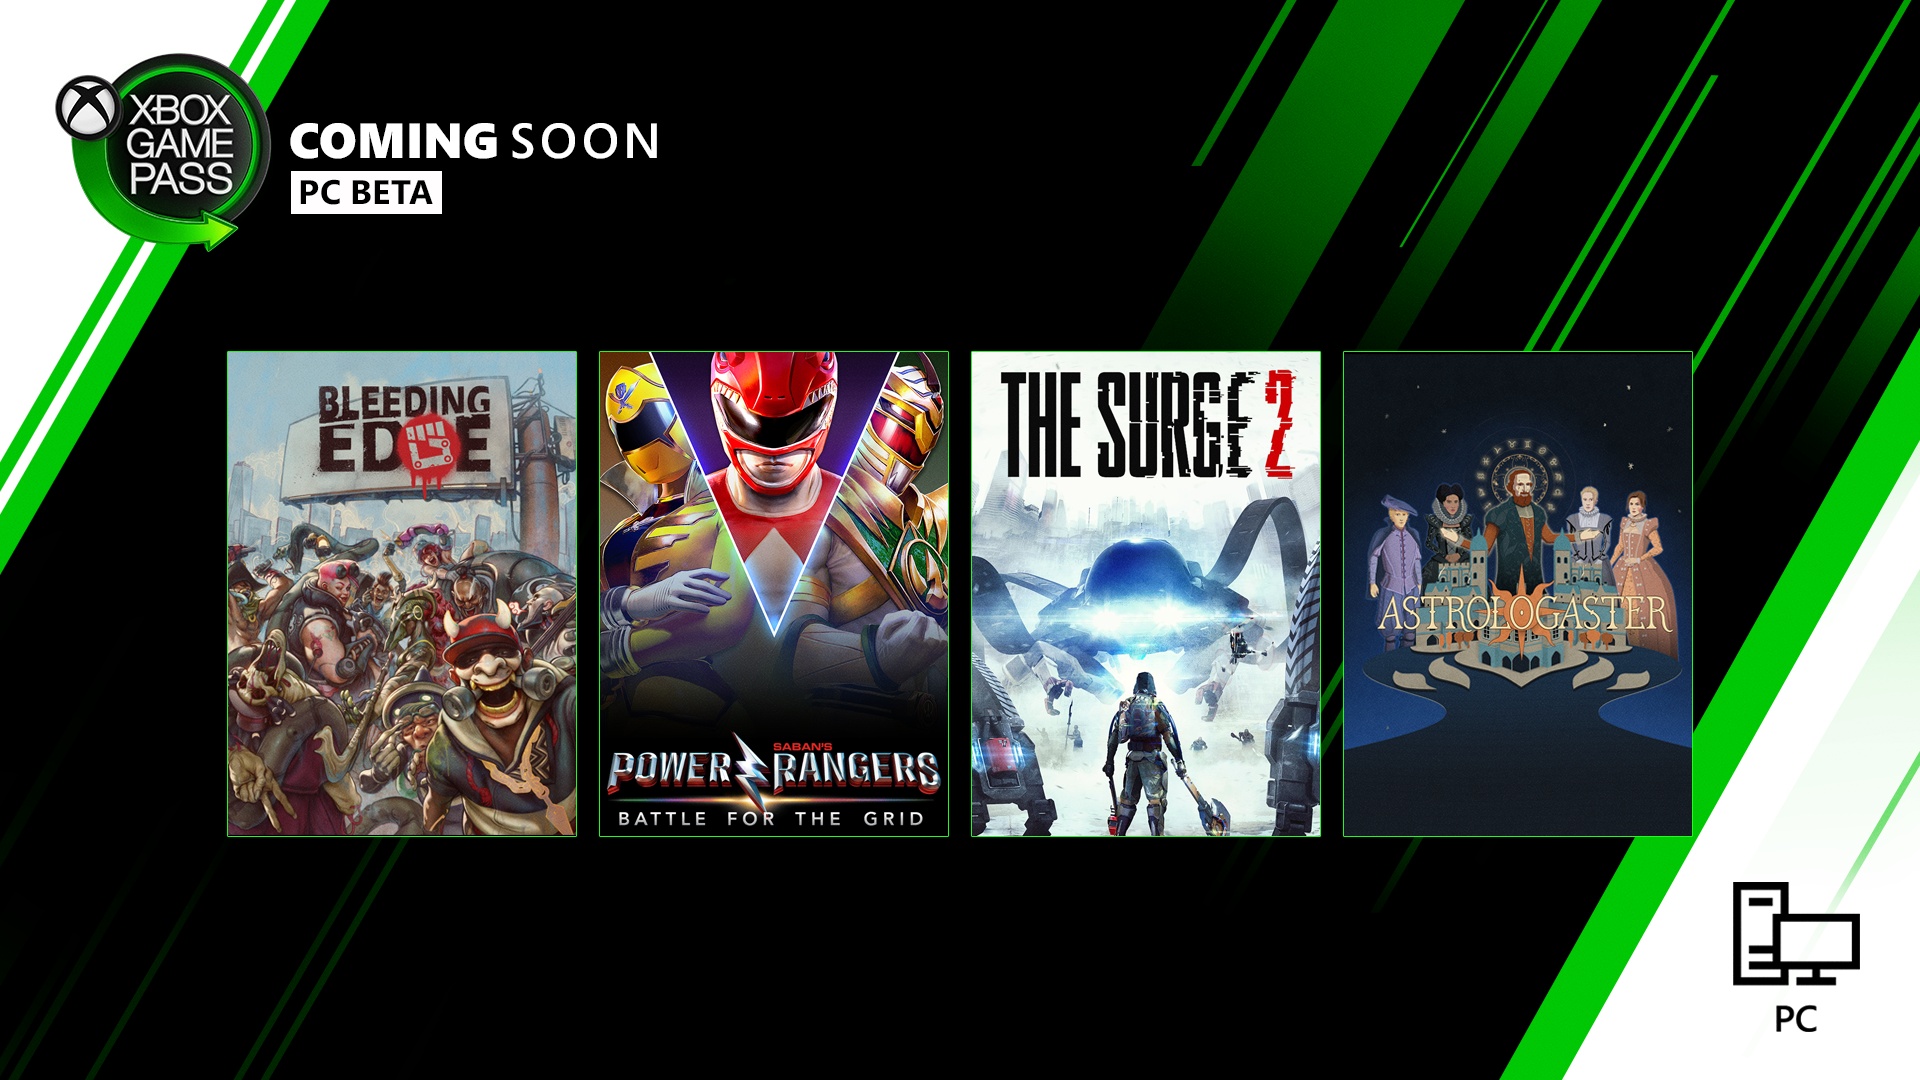 Xbox Game Pass PC is coming soon